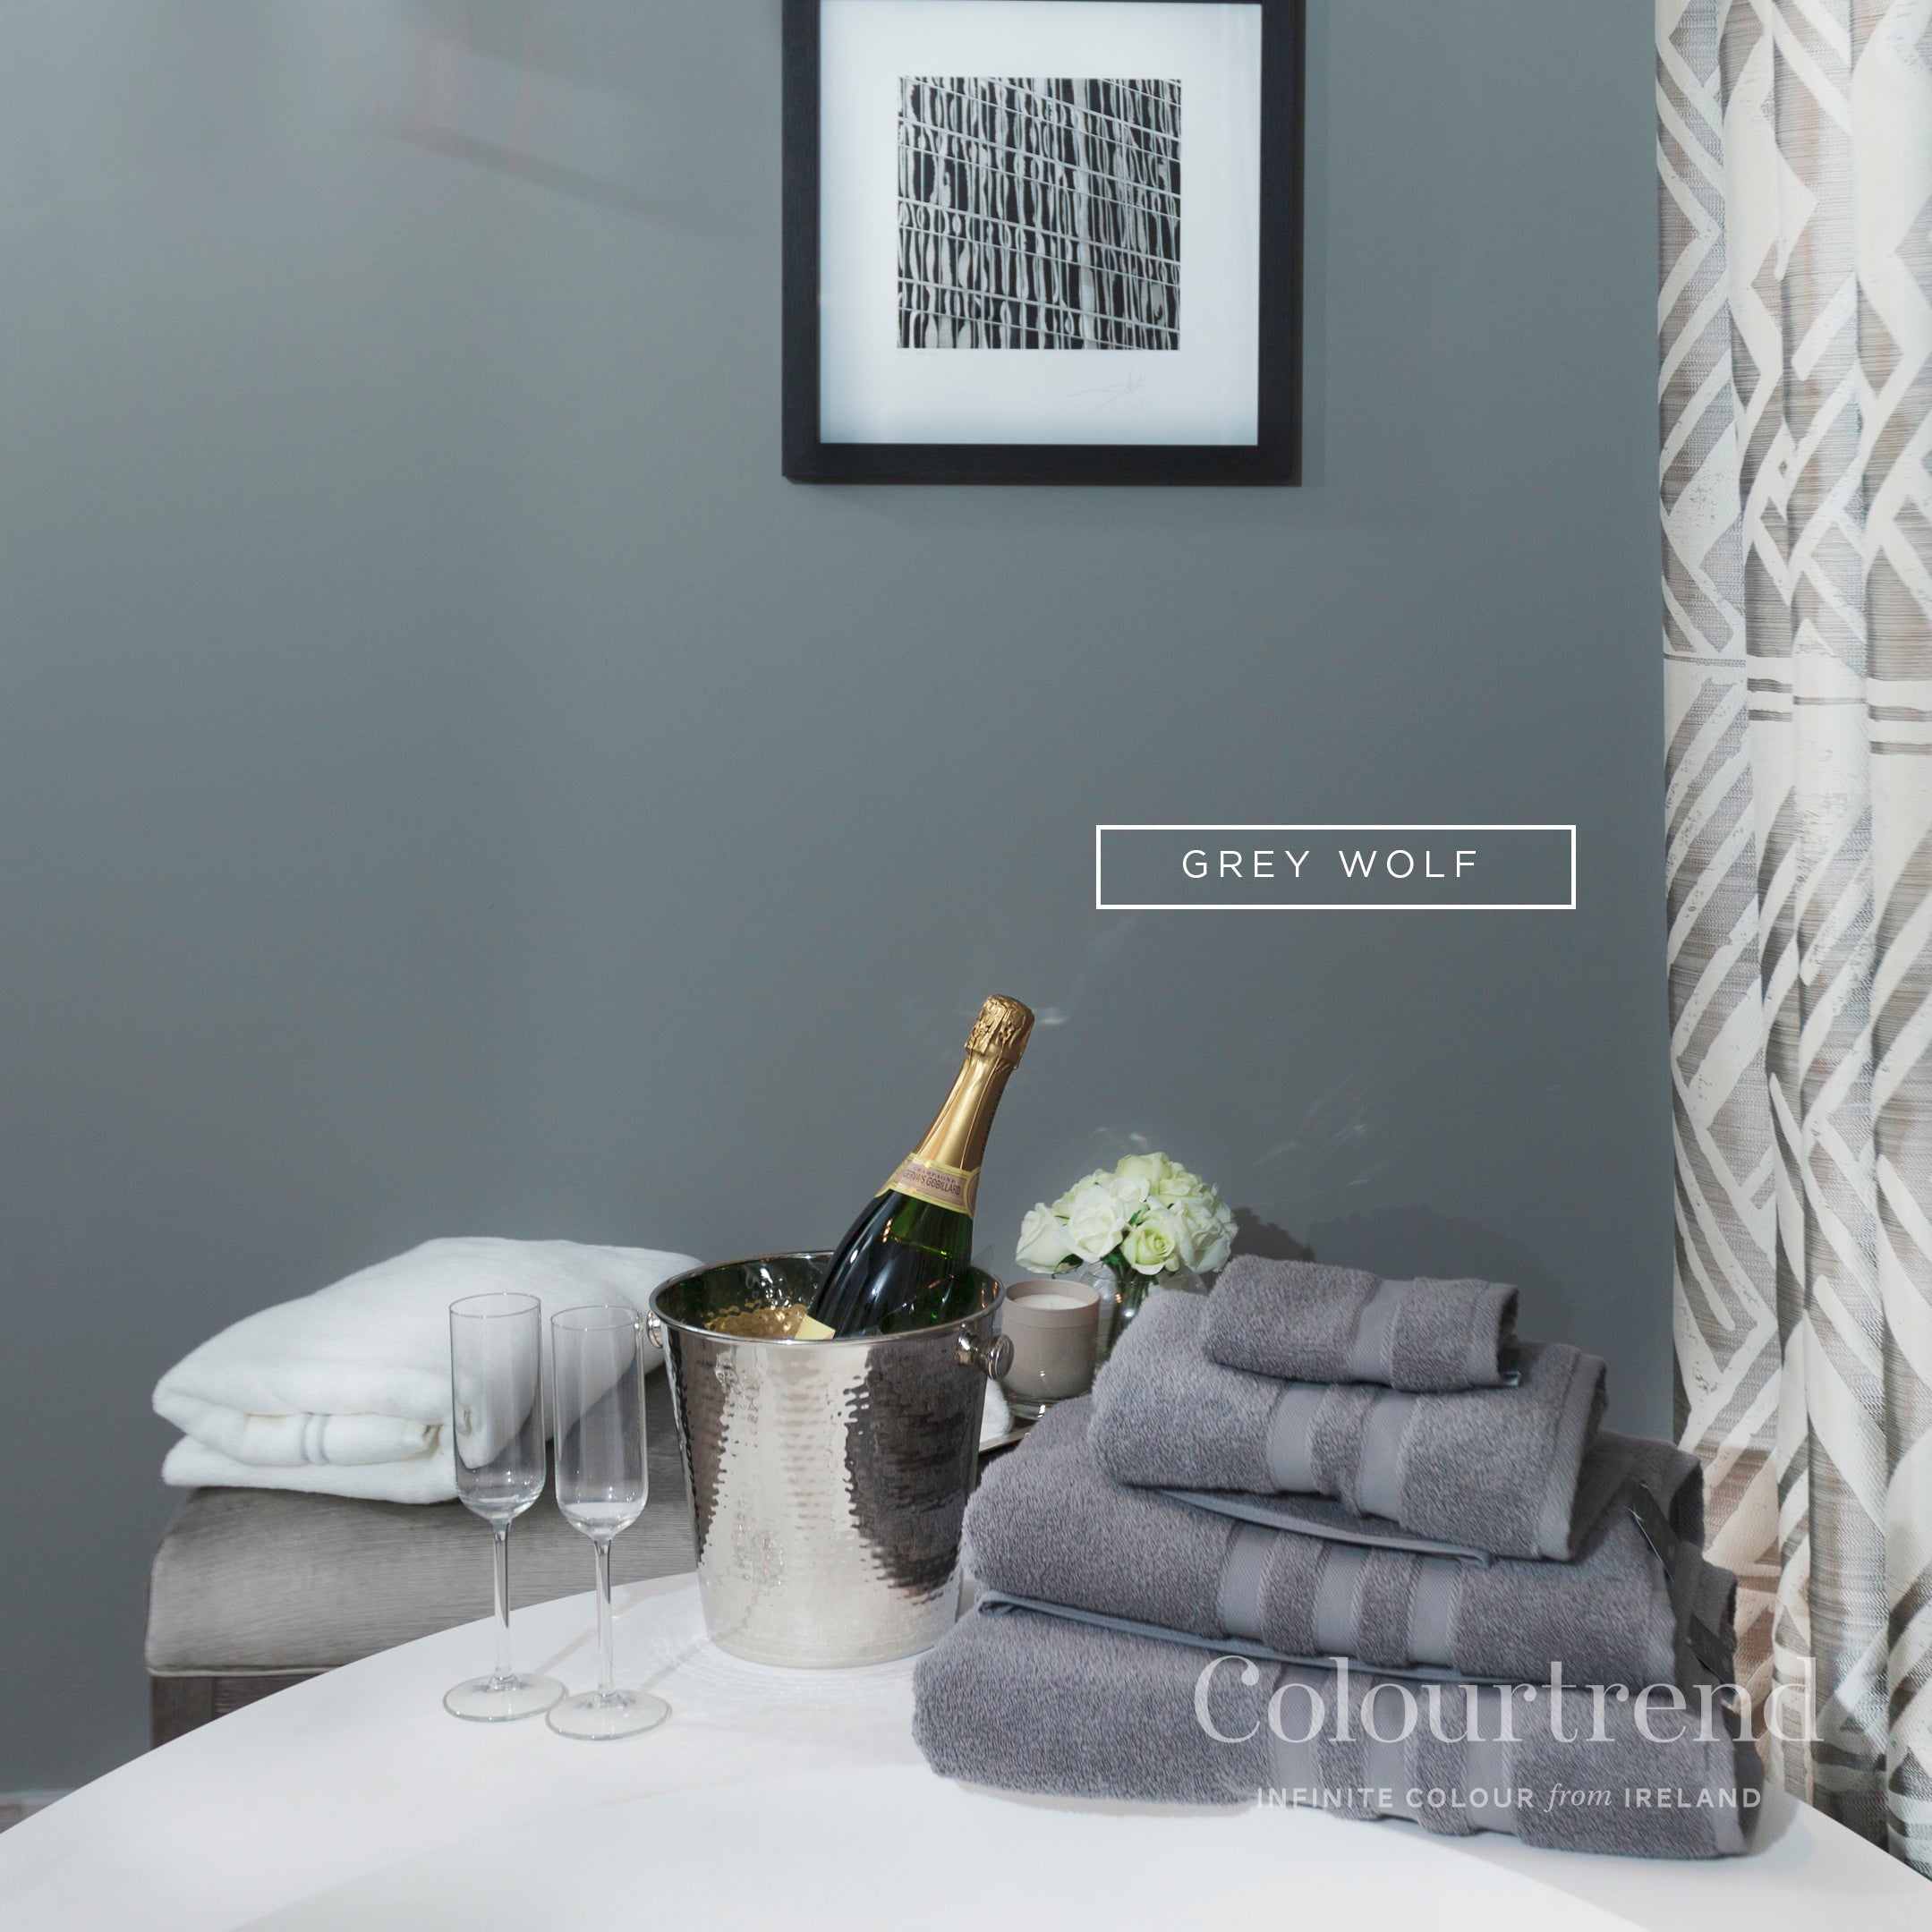 Colourtrend Grey Wolf | Same Day Dublin and Nationwide Paint in Ireland Delivery by Weirs of Baggot Street - Official Colourtrend Stockist